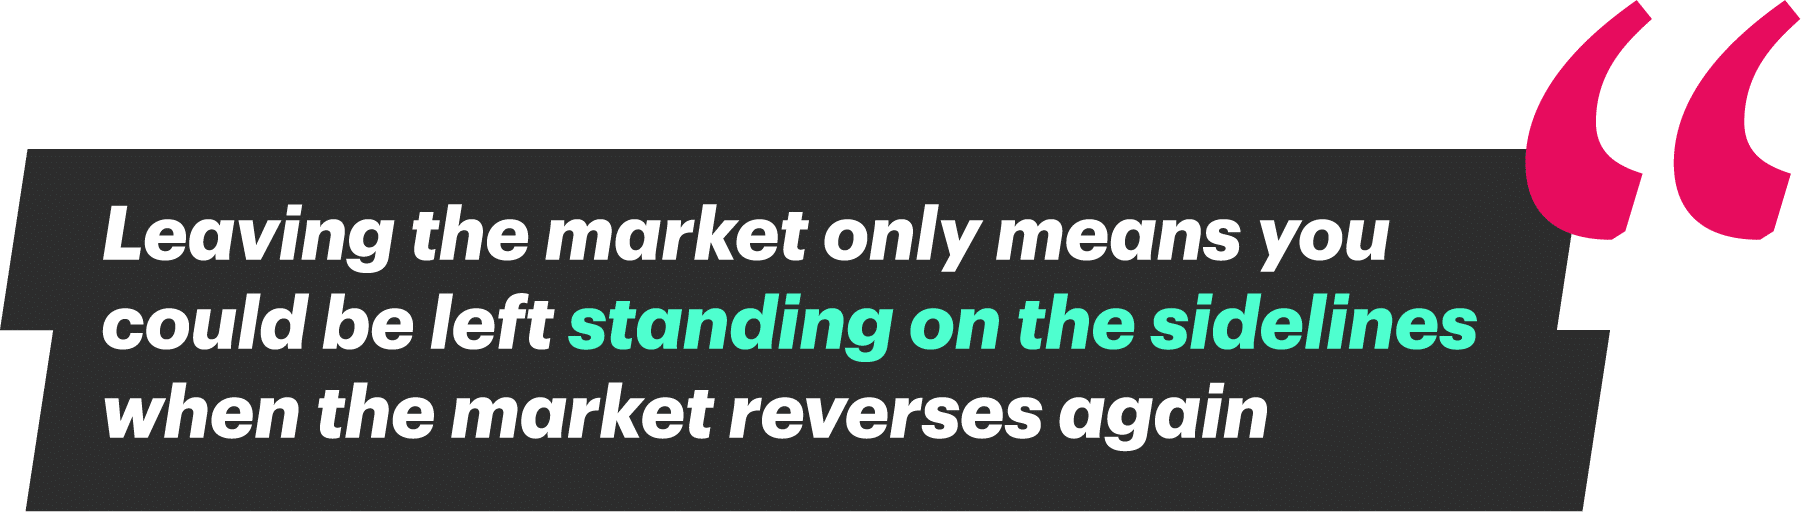 Pull quote: "Leaving the market only means you could be left standing on the sidelines when the market reverses again"